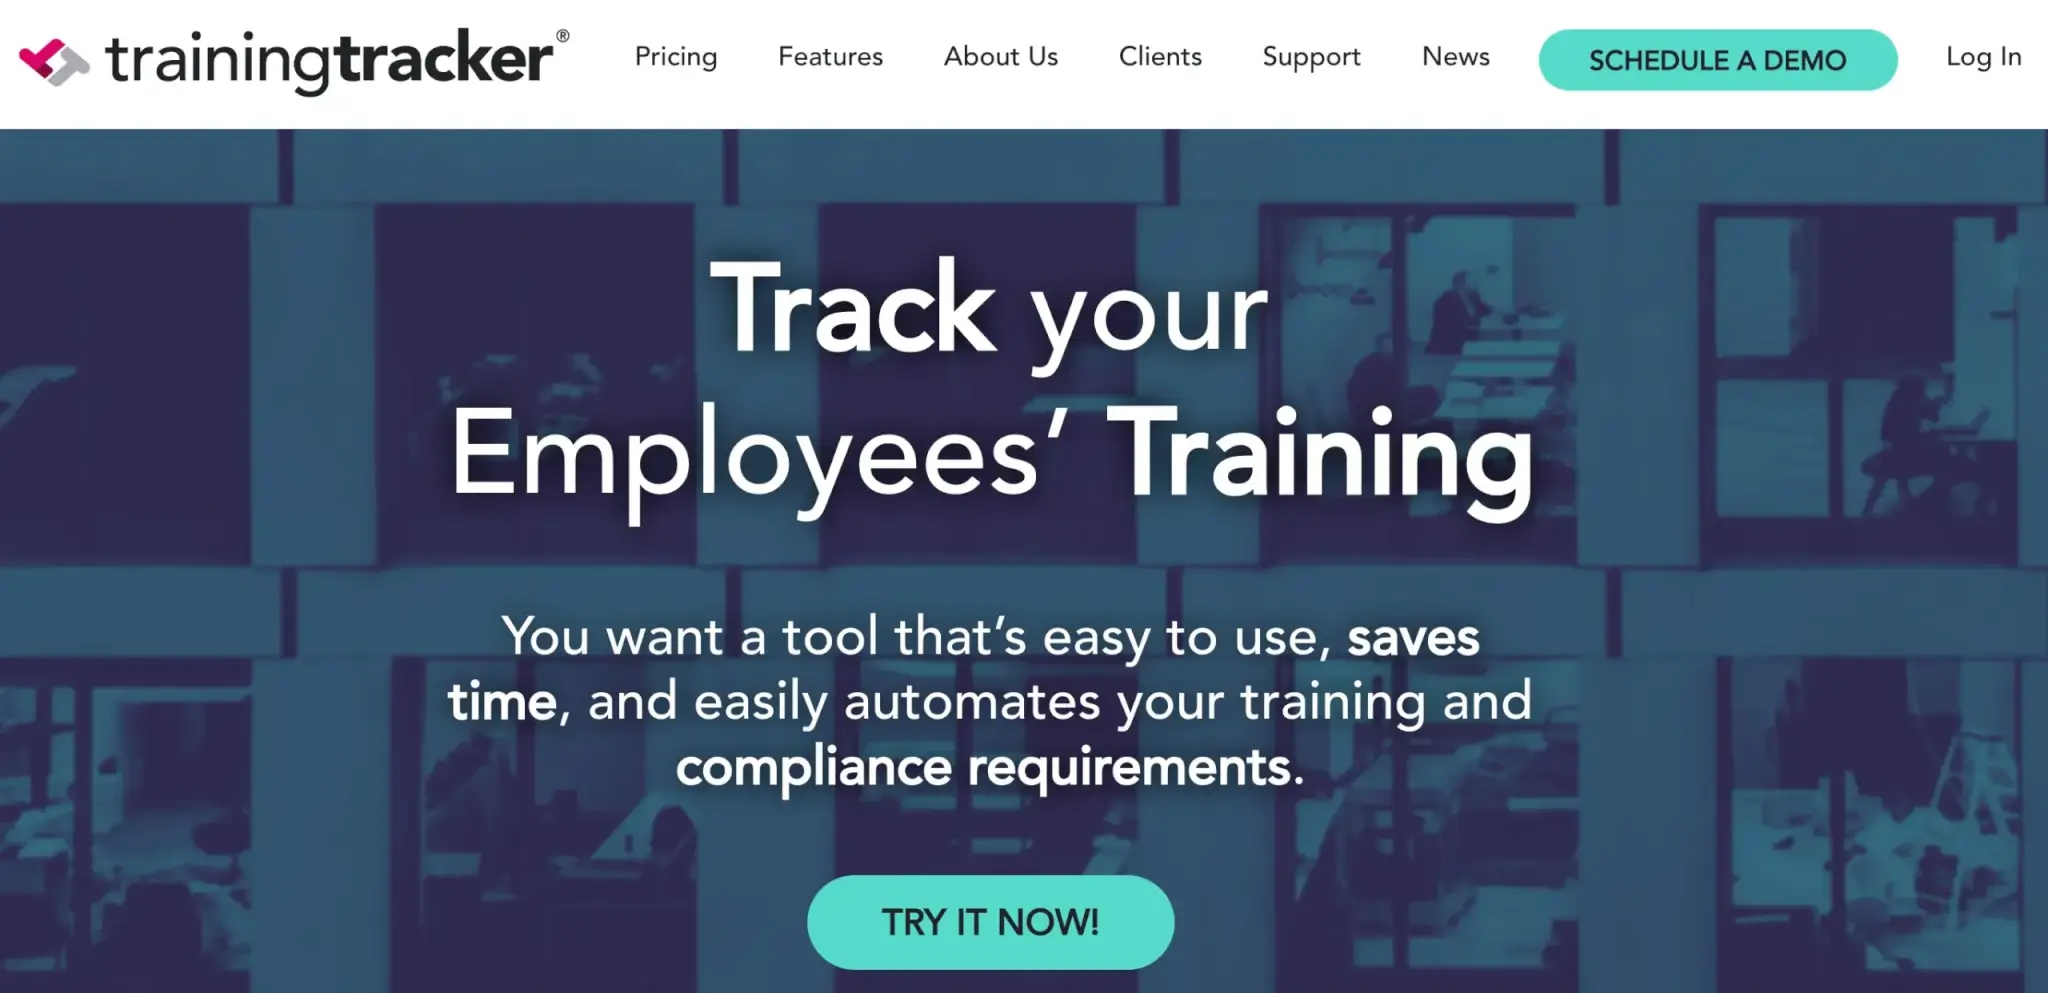 a screenshot of Training Tracker's landing page showing several workplace images in a dark background